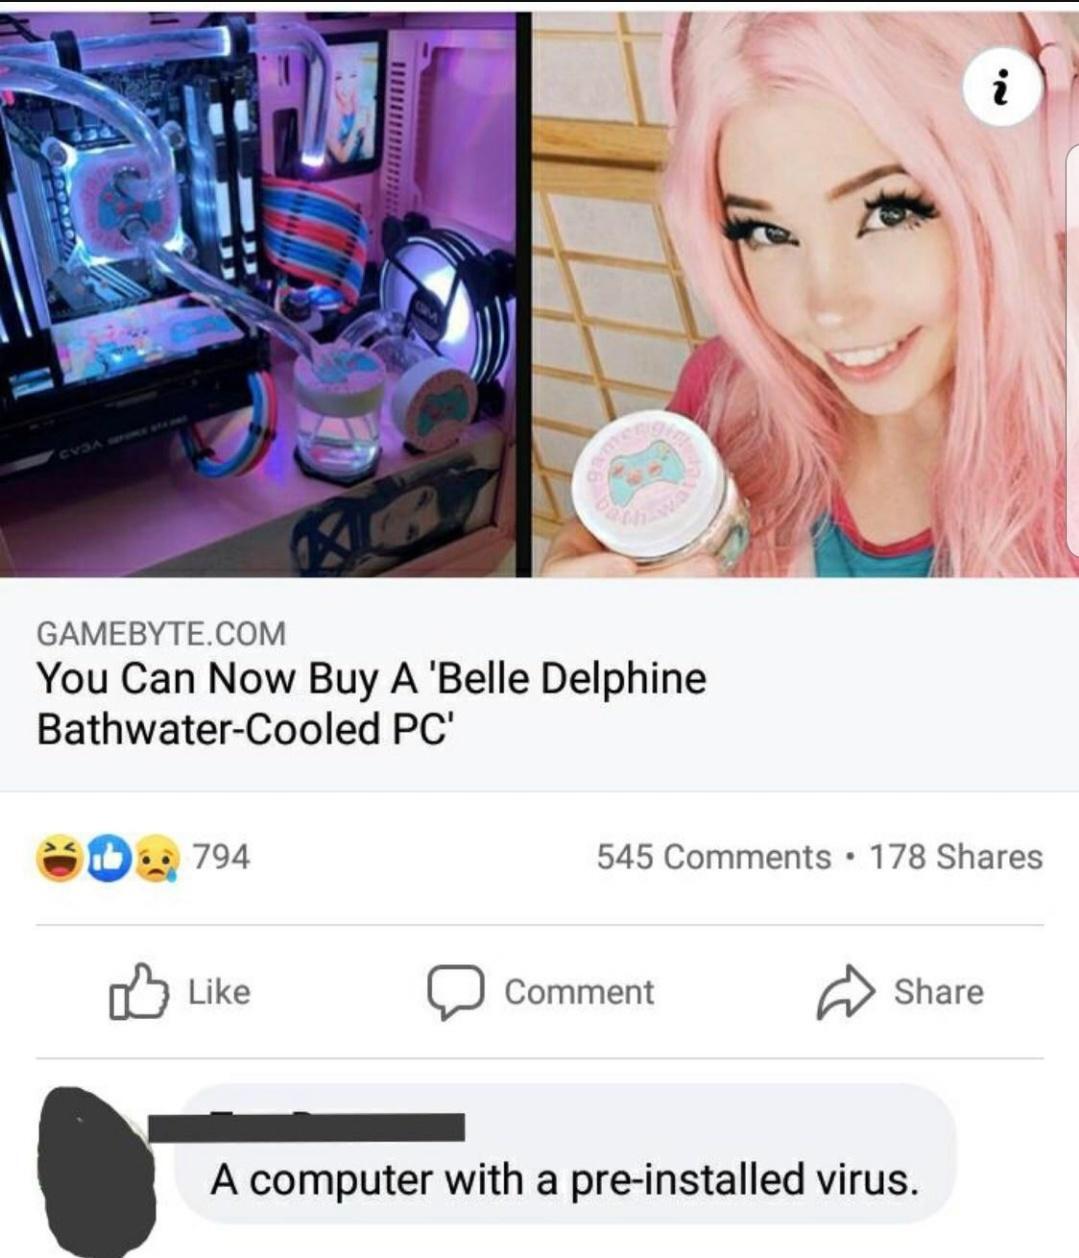 monday morning randomness - simp pc - Gamebyte.Com You Can Now Buy A 'Belle Delphine BathwaterCooled Pc' 794 545 178 Comment A computer with a preinstalled virus.